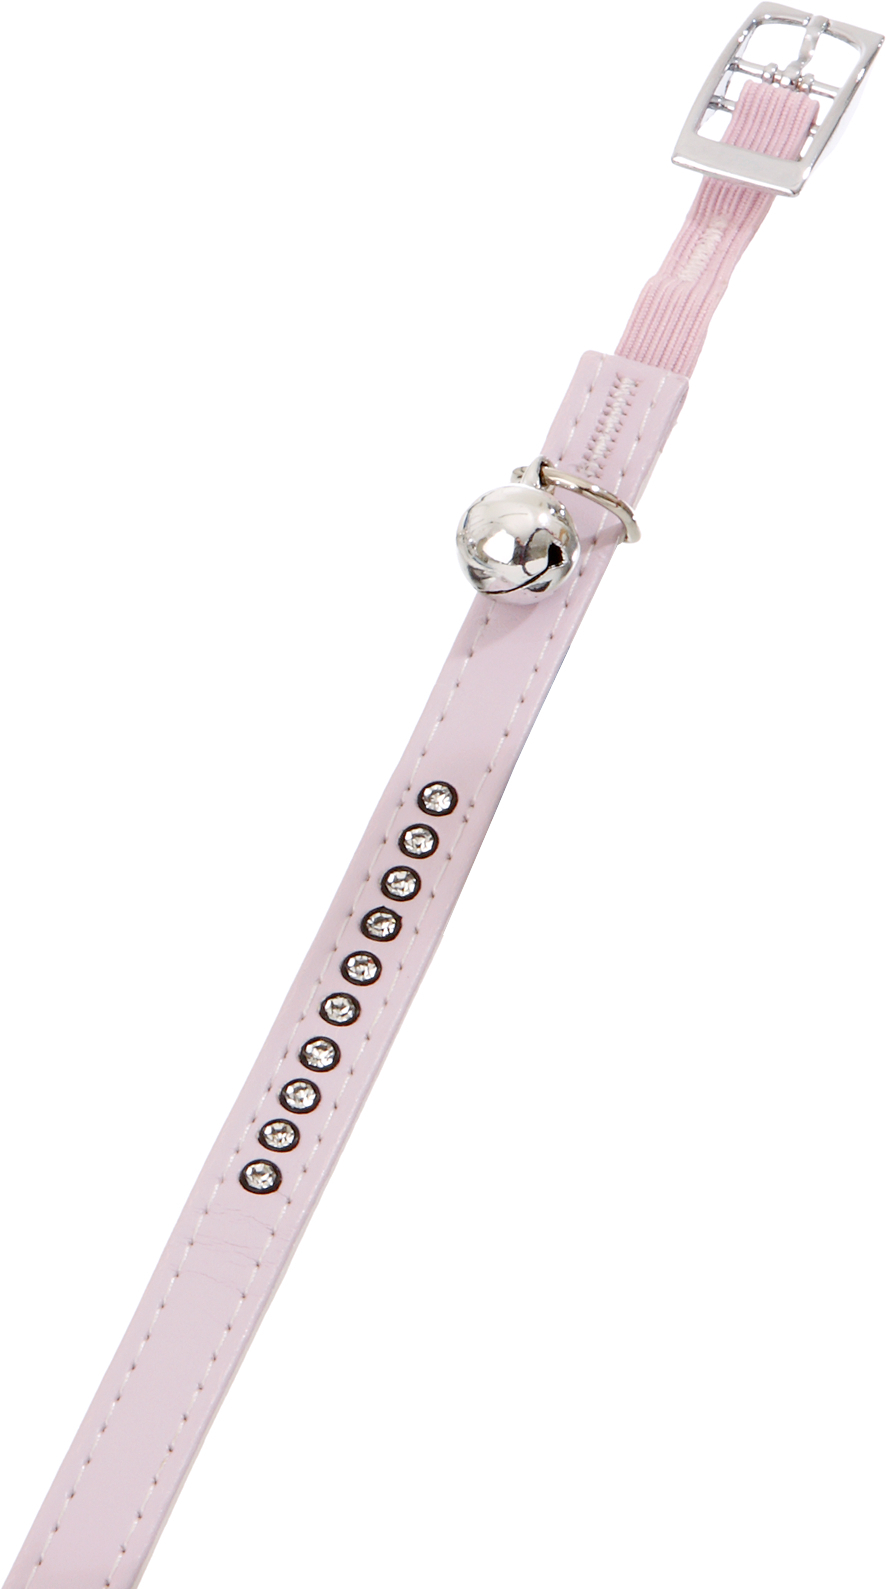 Collier strass pour chat Monte-Carlo